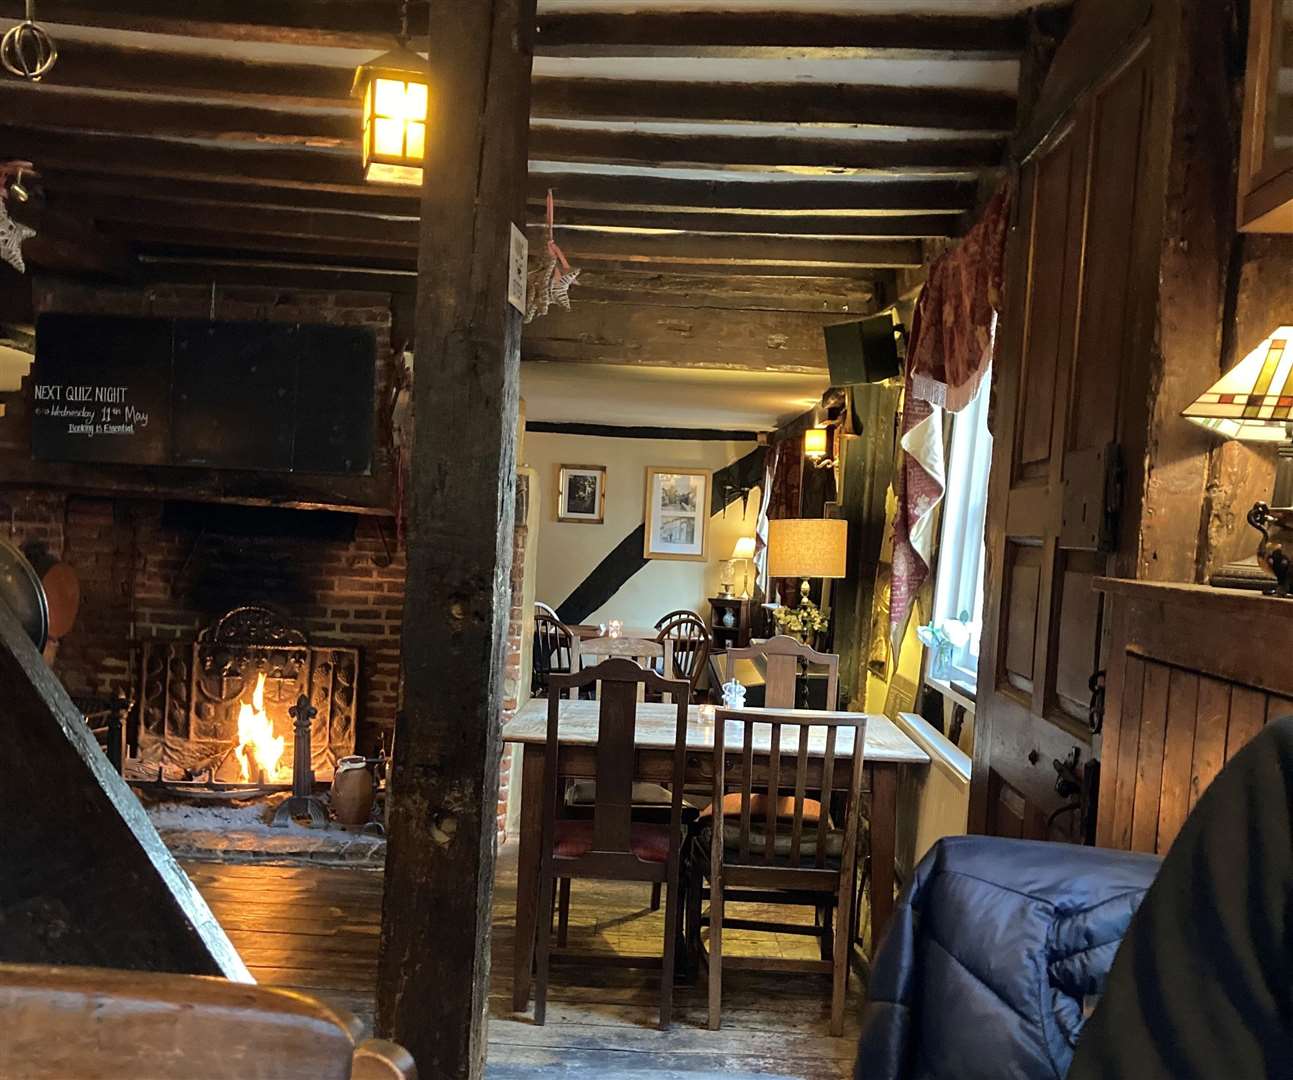 Once you’re through the bar, the rest of the pub opens up into a large dining area with separate ‘rooms’ only divided by ancient, upright beams